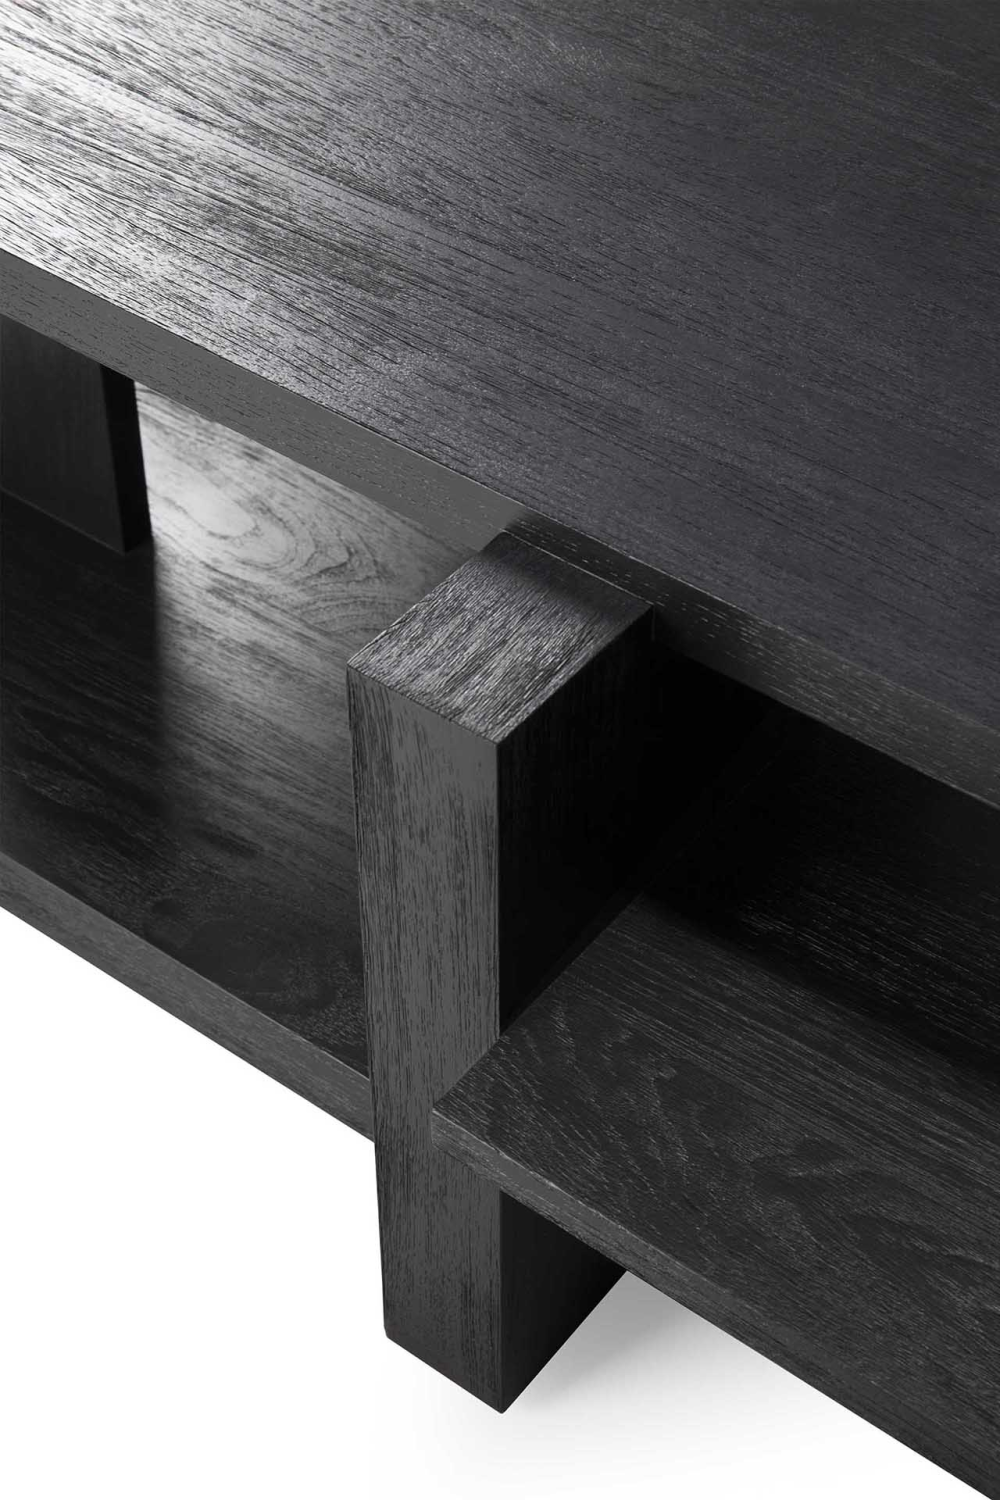 Black Teak Architectural Coffee Table | Ethnicraft Abstract | OROA.com